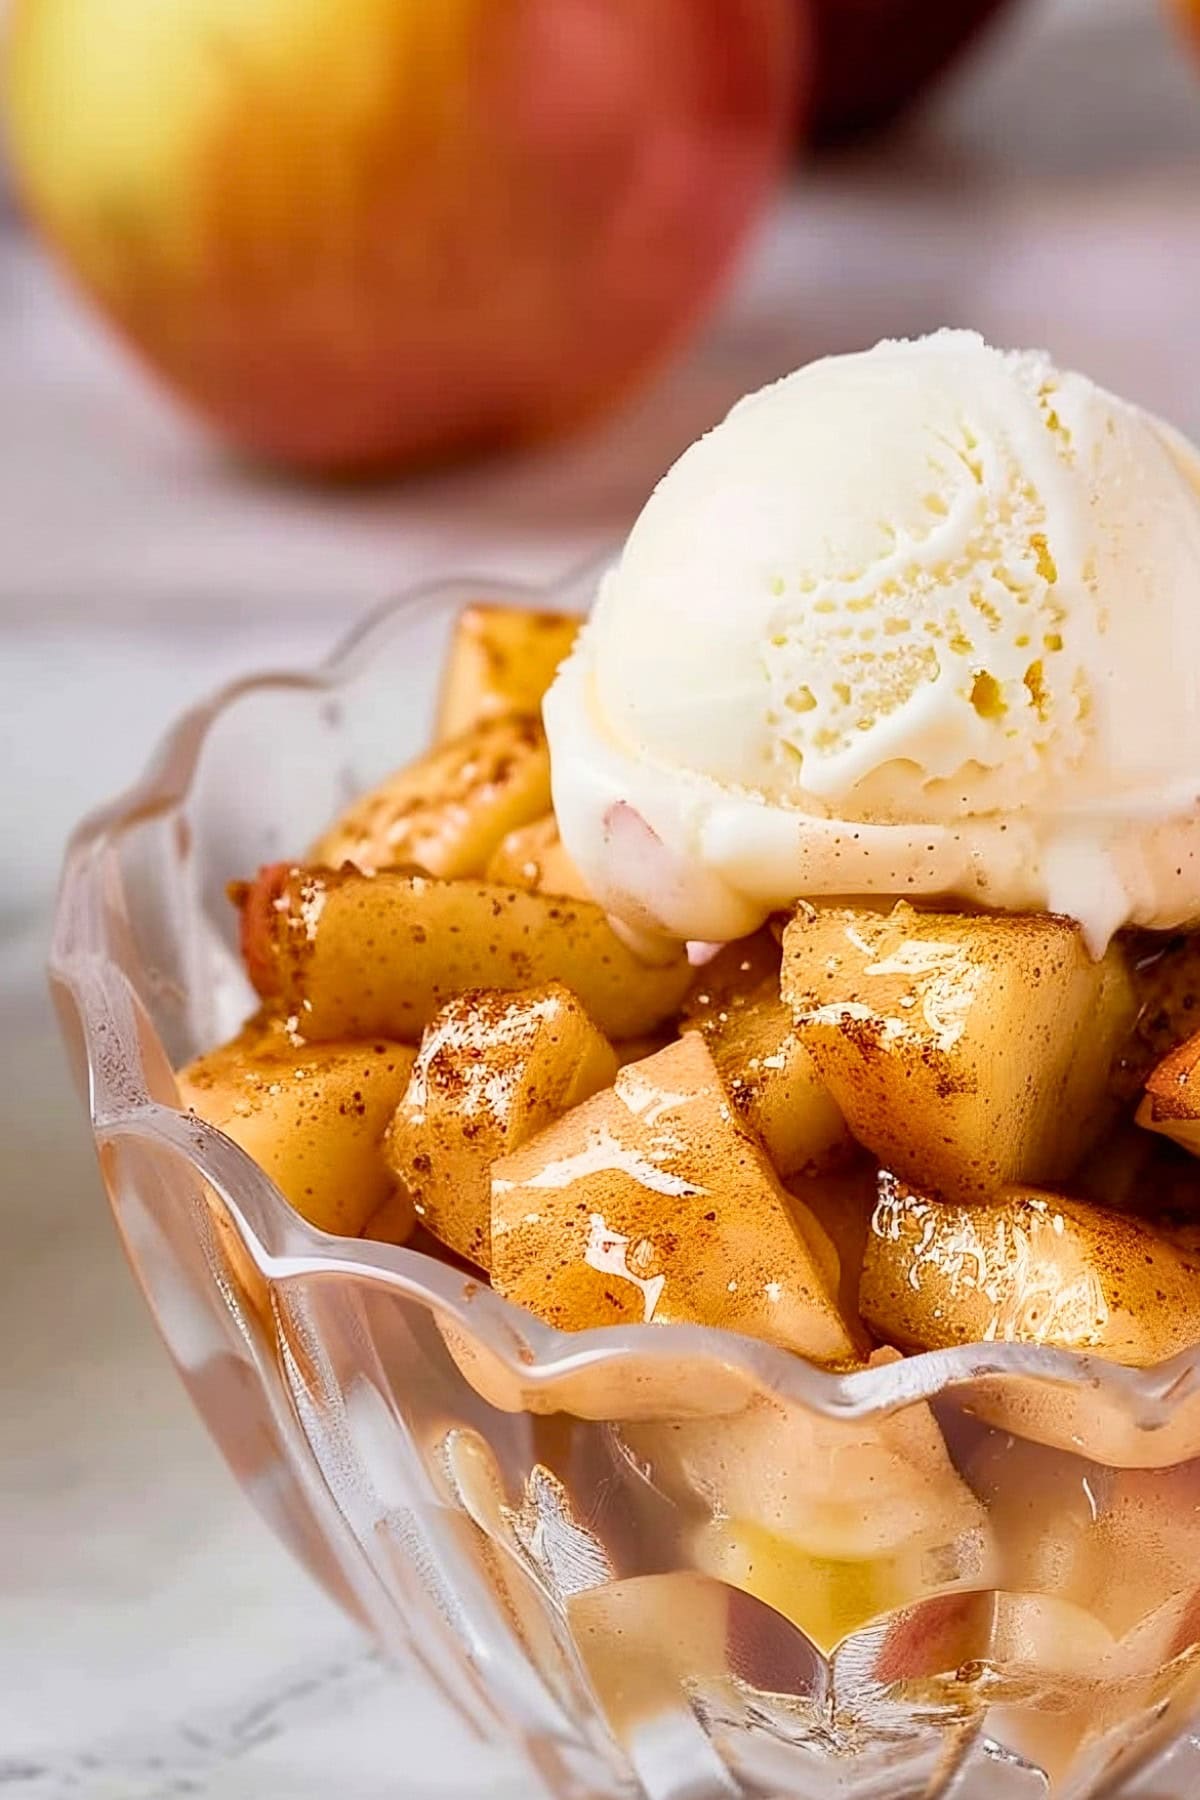 Super Close Up of Microwave Baked Apples with Cinnamon in a Glass Dish with a Scoop of Melty Vanilla Ice Cream